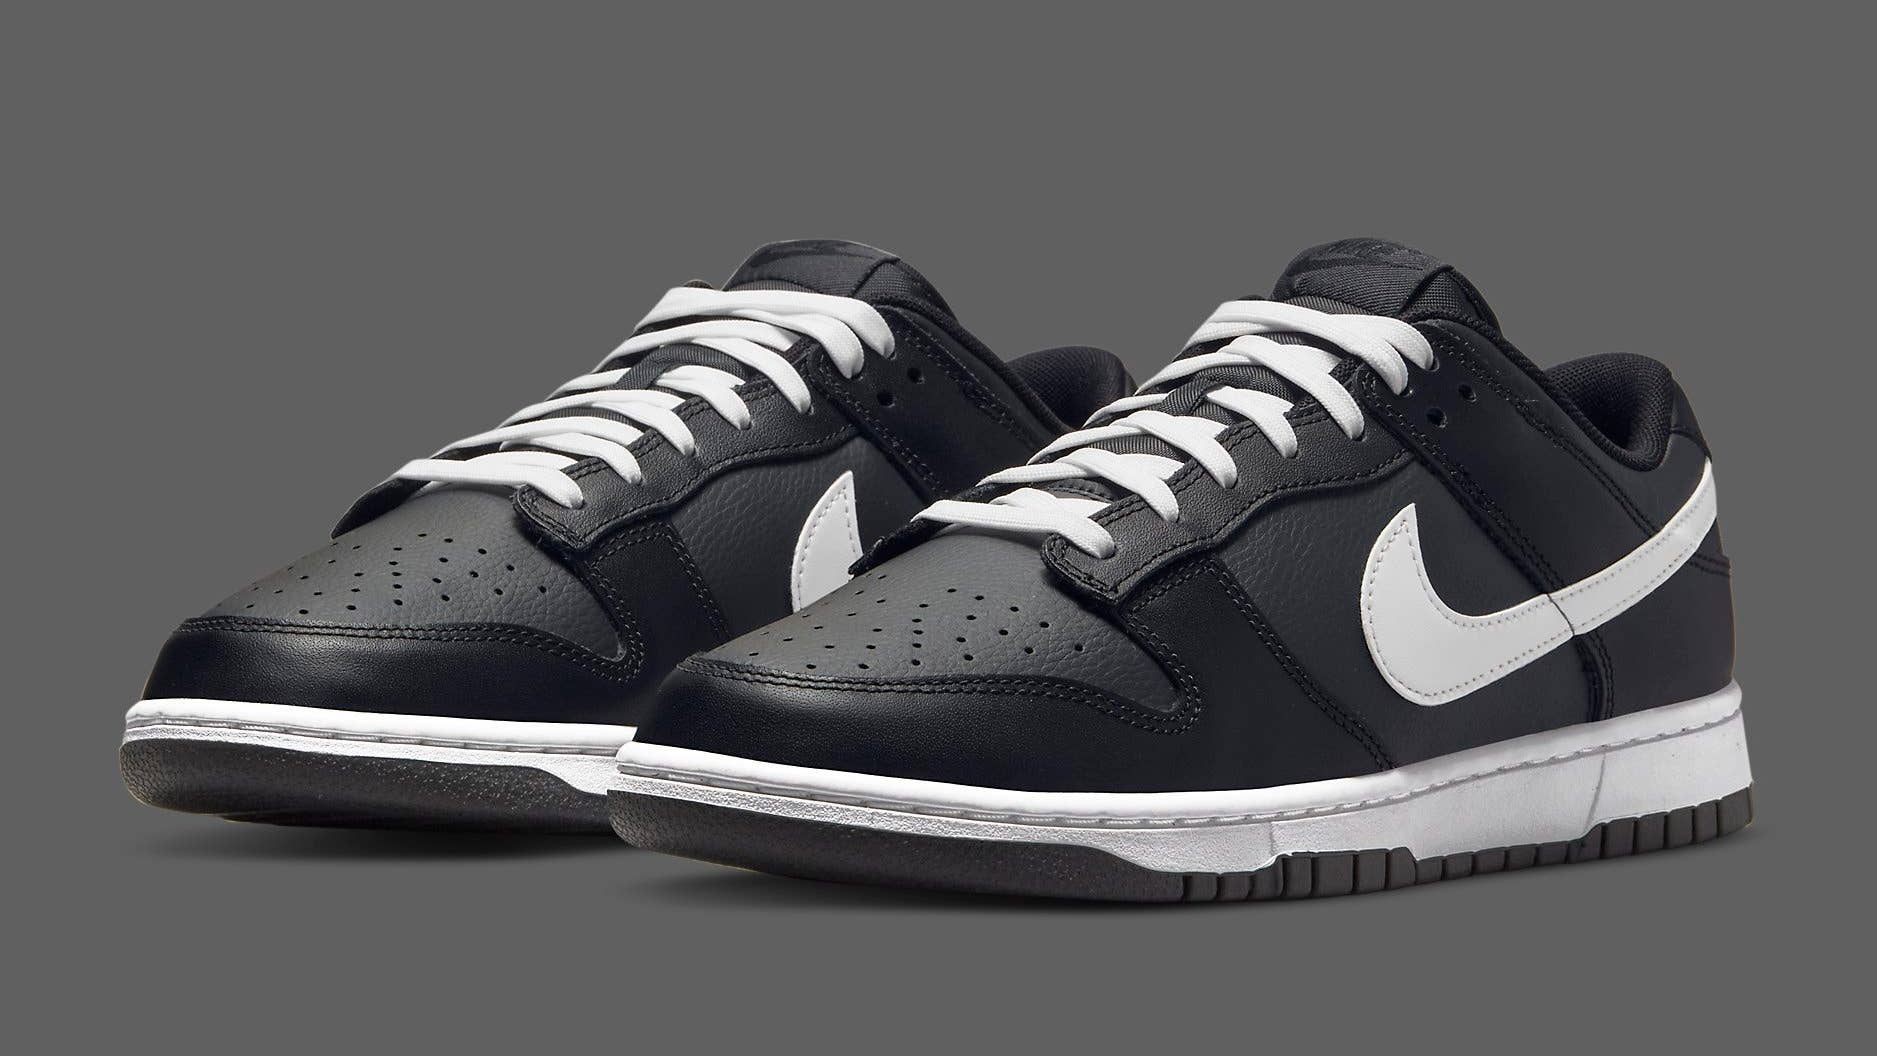 Shuraba Krimpen groef Another Black and White Nike Dunk Is Releasing Soon | Complex